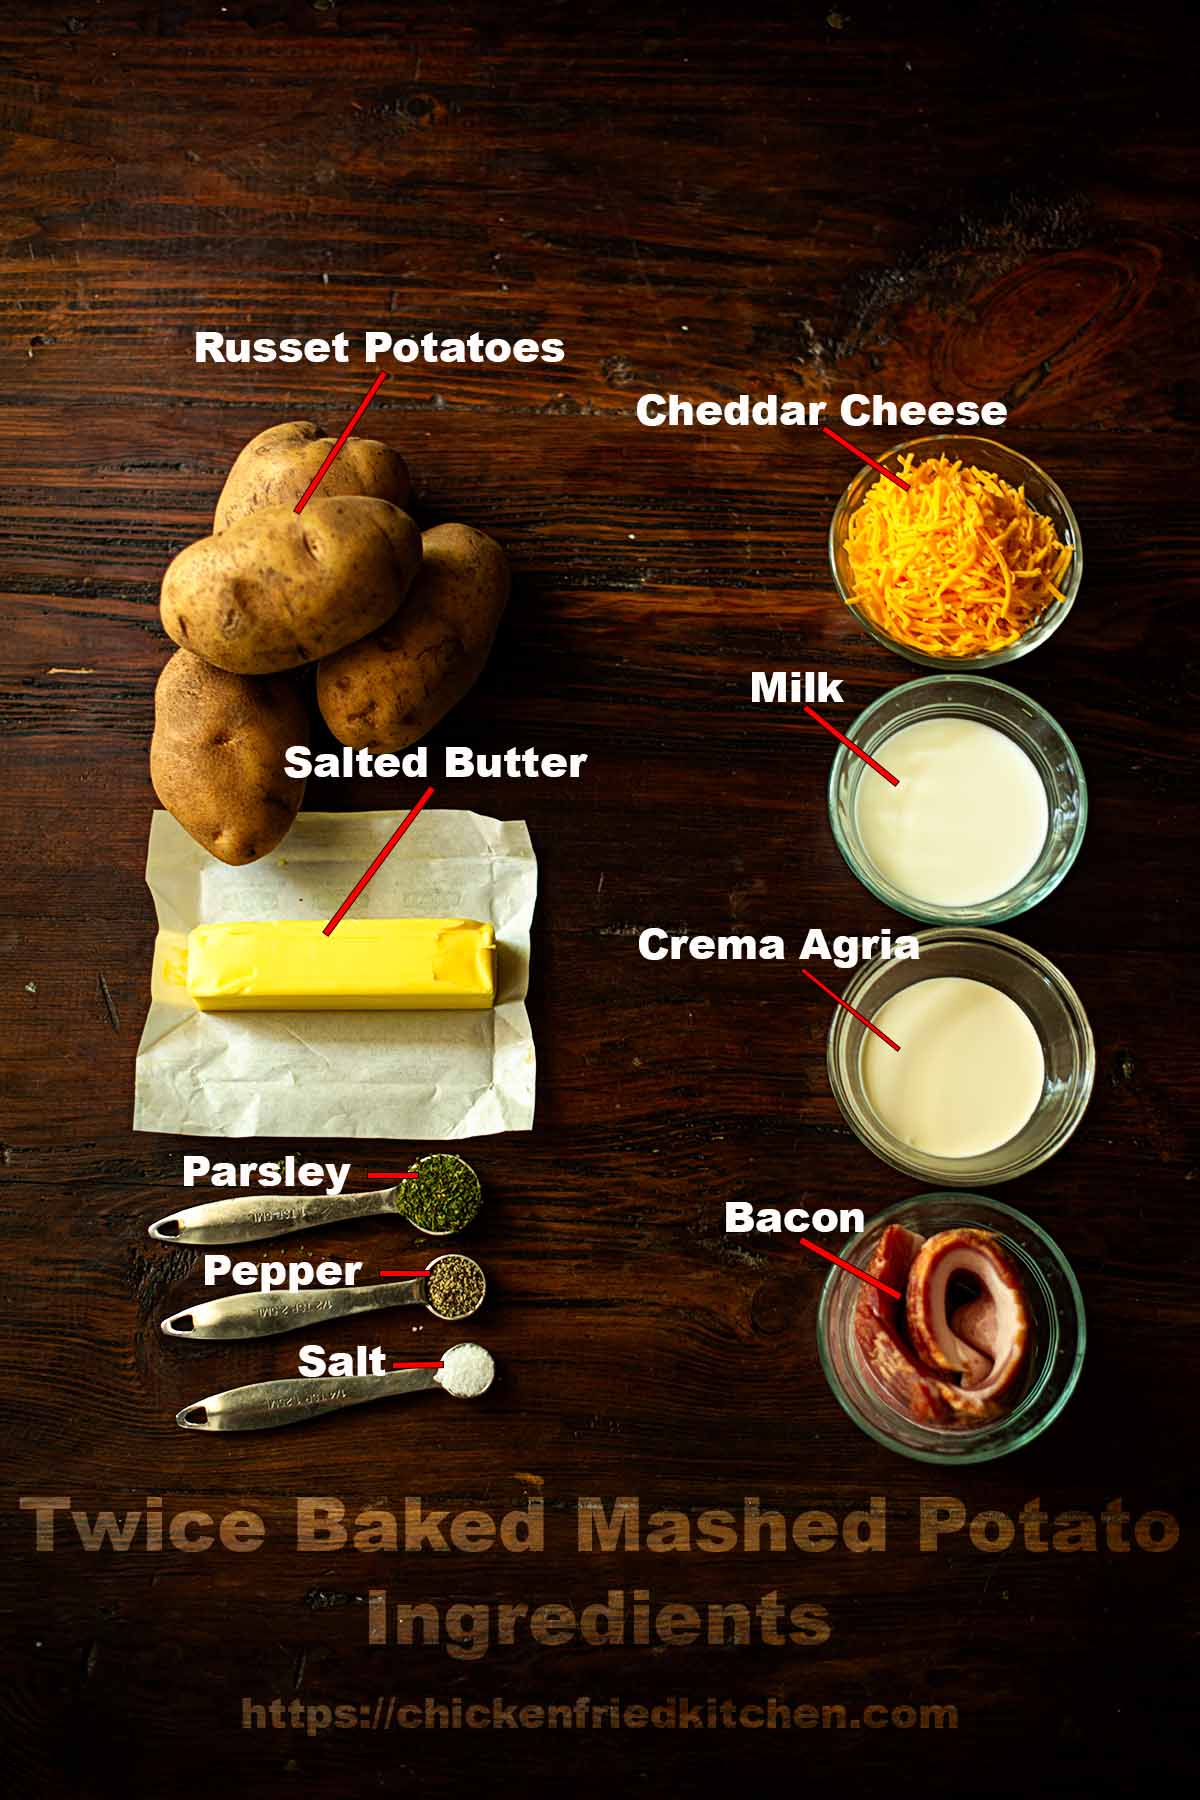 Twice Baked Mashed Potato ingredients pictured and listed.